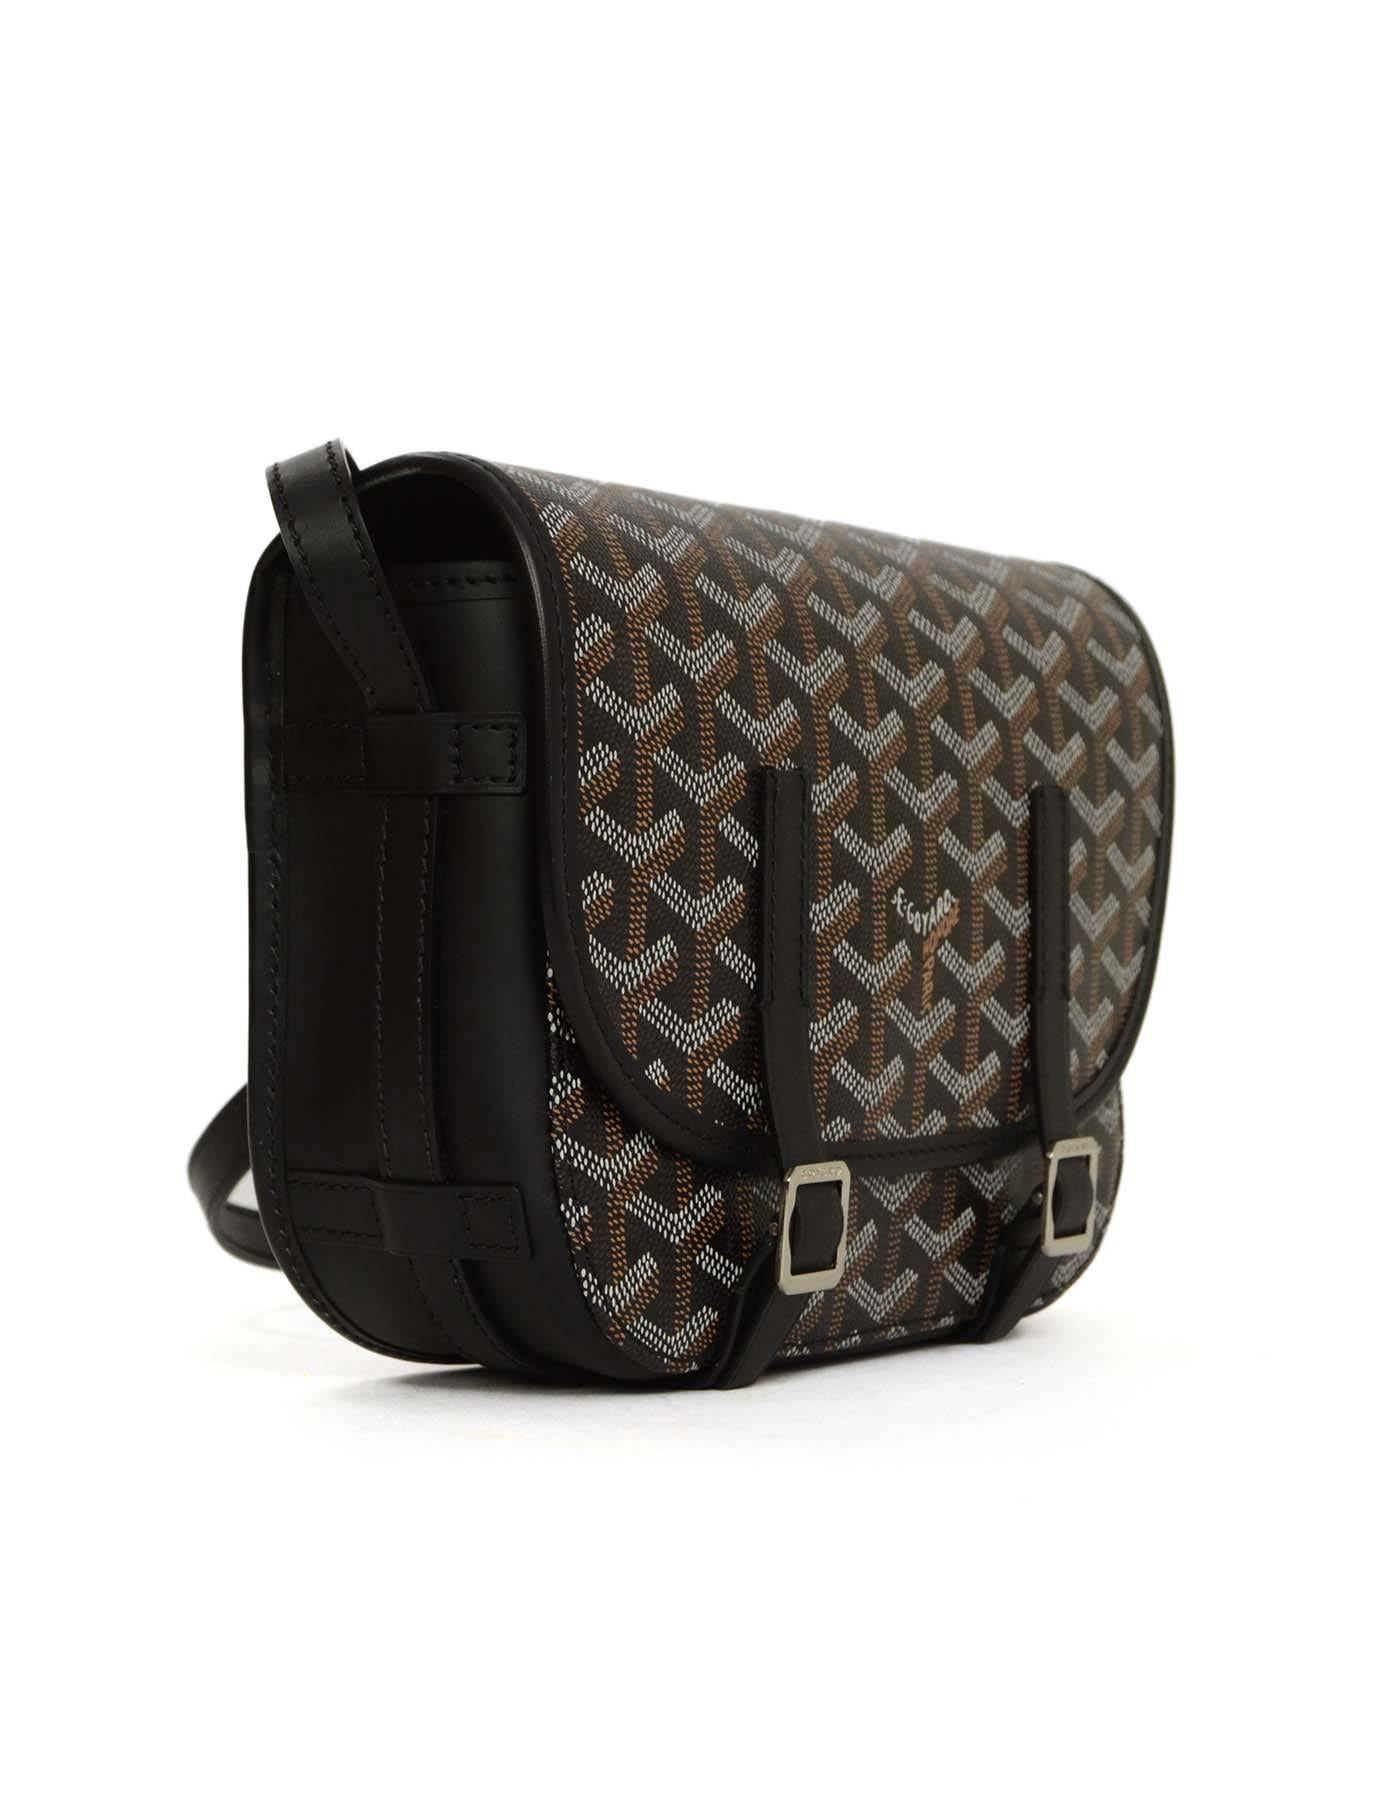 Goyard Black & Navy Chevron Print Belvedere PM Crossbody Bag 
Features adjustable shoulder strap
Made In: France
Color: Black, navy, white and yellow
Hardware: Silvetone
Materials: Coated canvas and leather
Lining: Beige and yellow